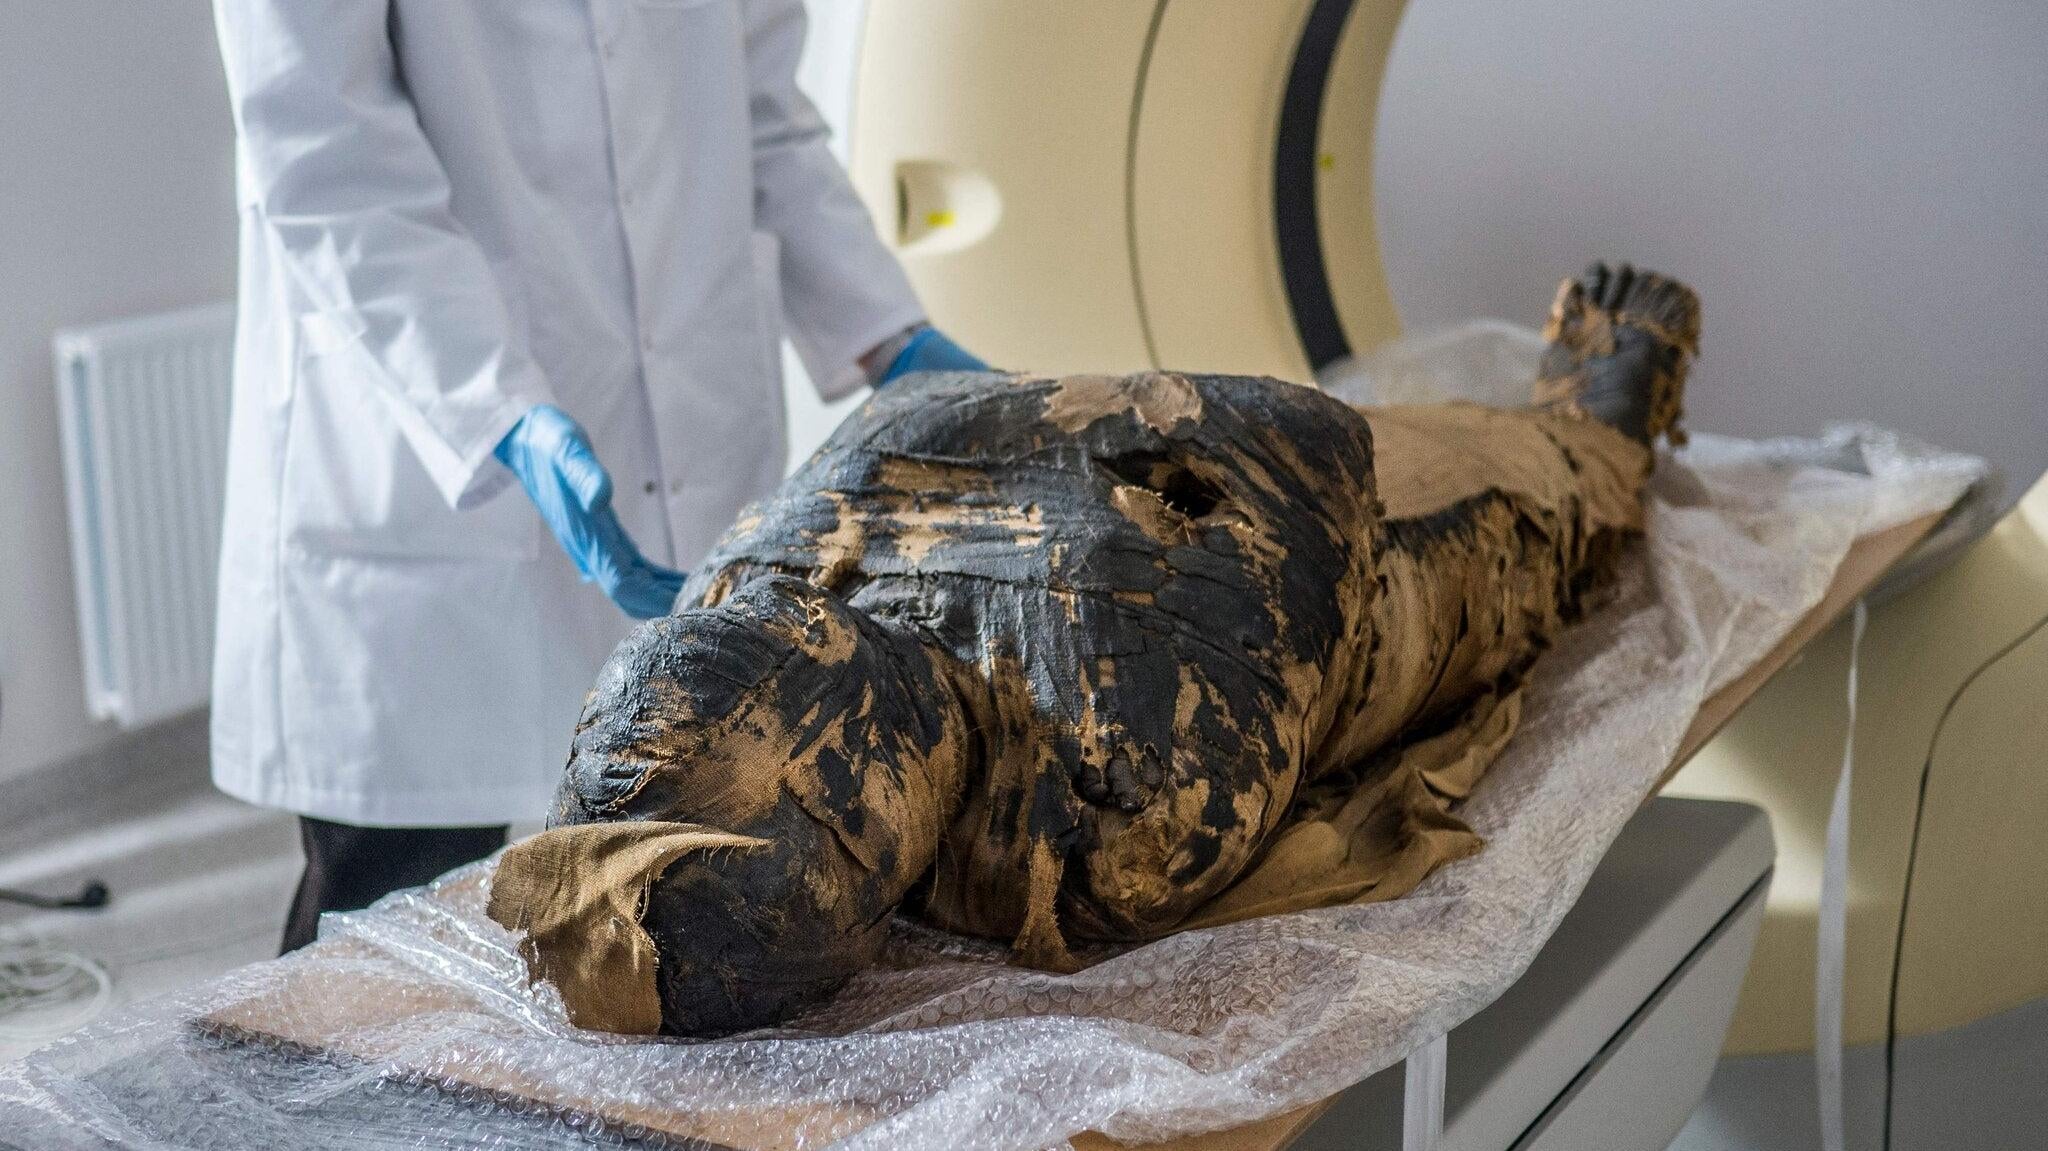 The mummy in question getting an MRI in 2015. (Photo: Courtesy Warsaw Mummy Project)